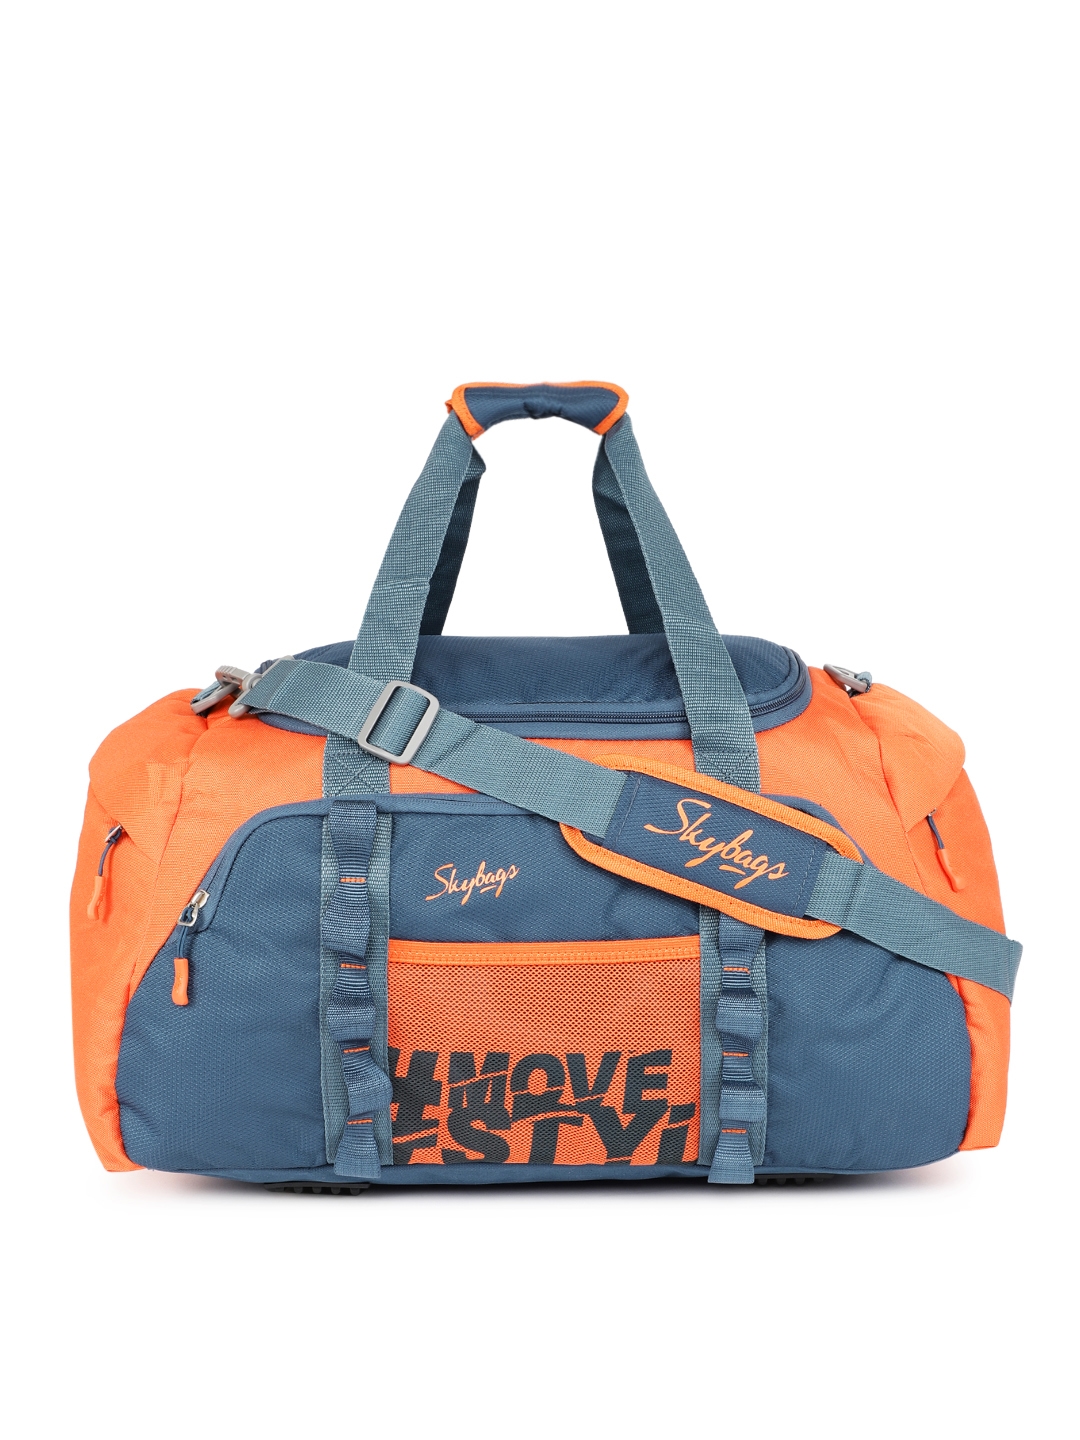 Duffle Bag Buy Duffle Bag online at best prices in India  Amazonin